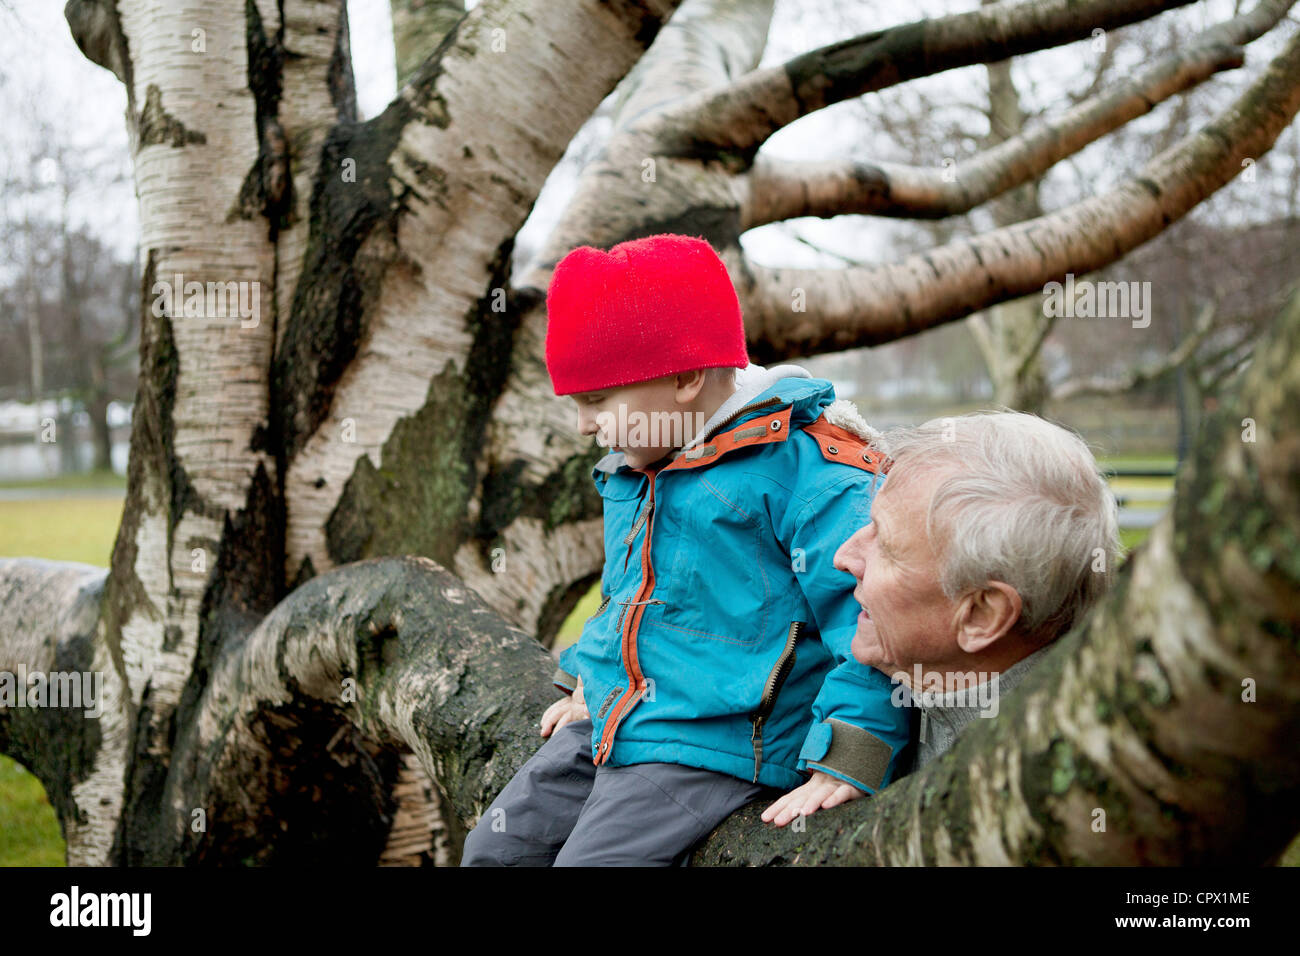 Granfather and boy sitting on tree branch Stock Photo